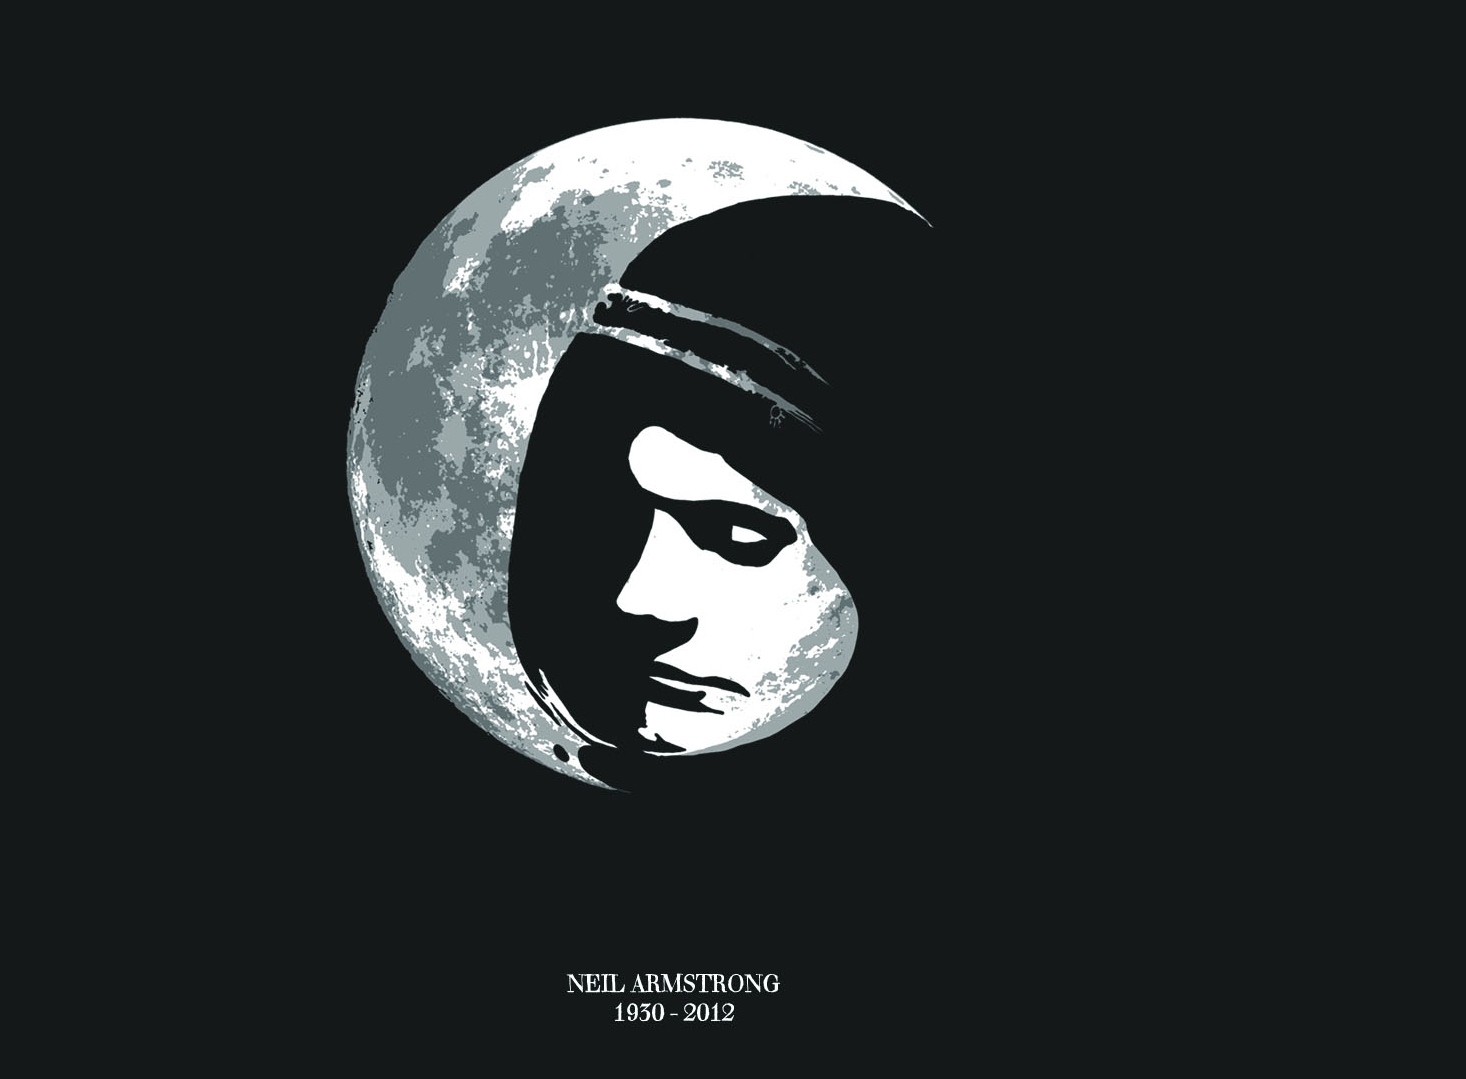 Tributo a Neil Armstrong